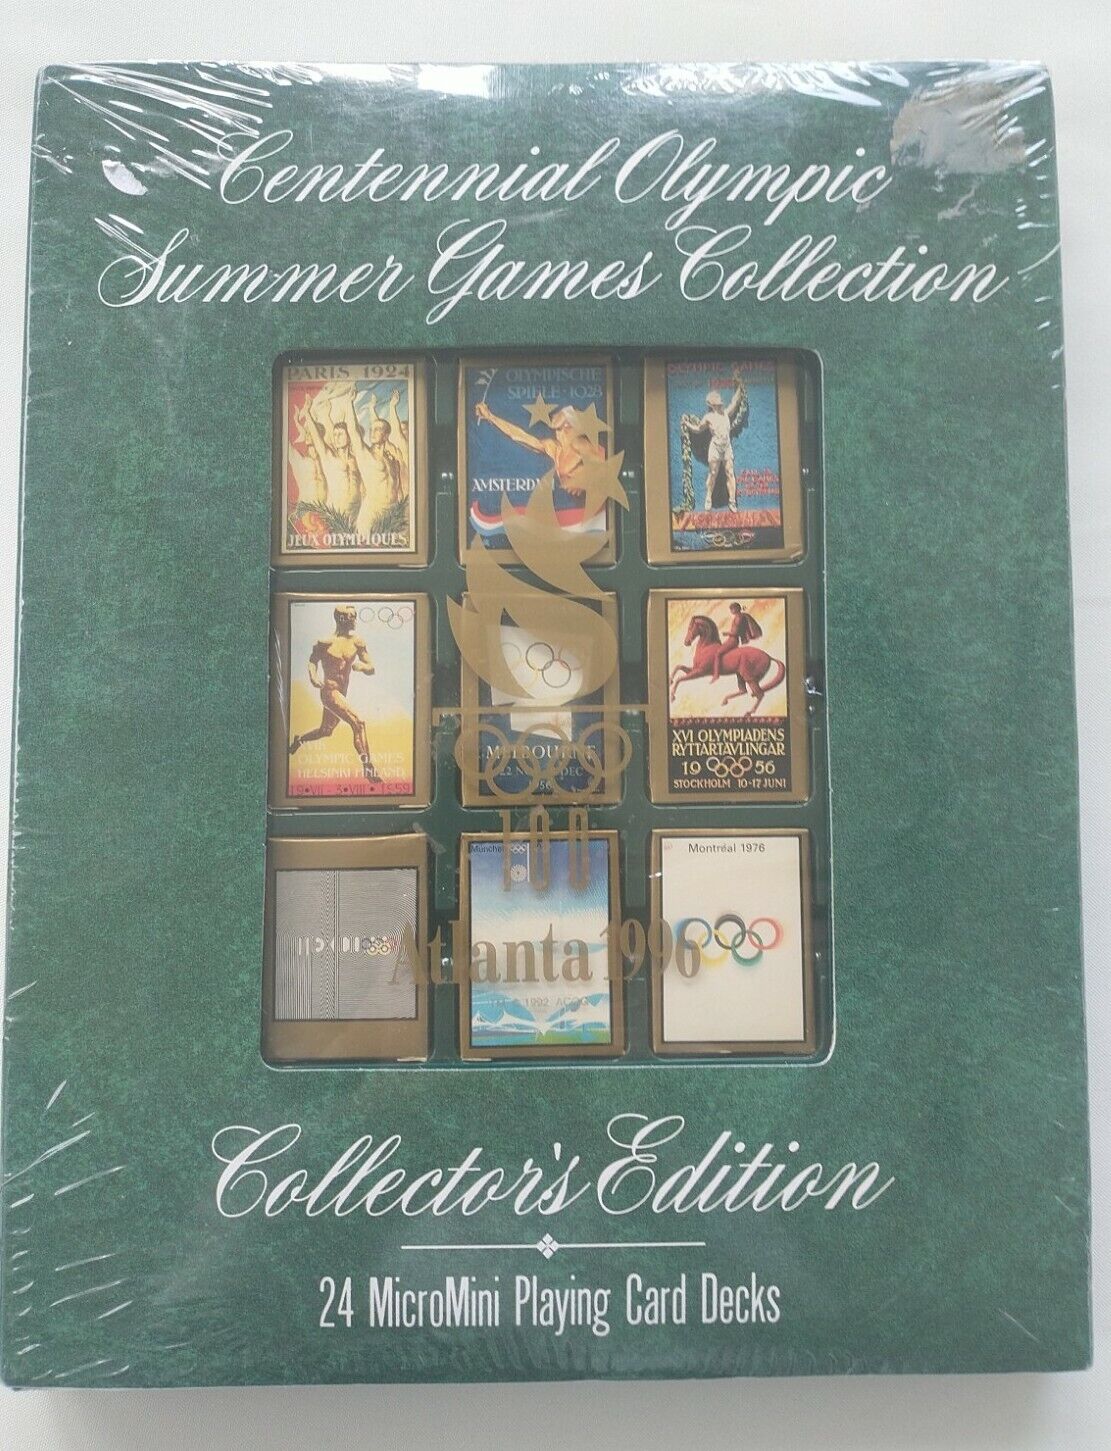 Centennial Olympic Summer Games 1996 Collection 24 MicroMini Playing Card Decks